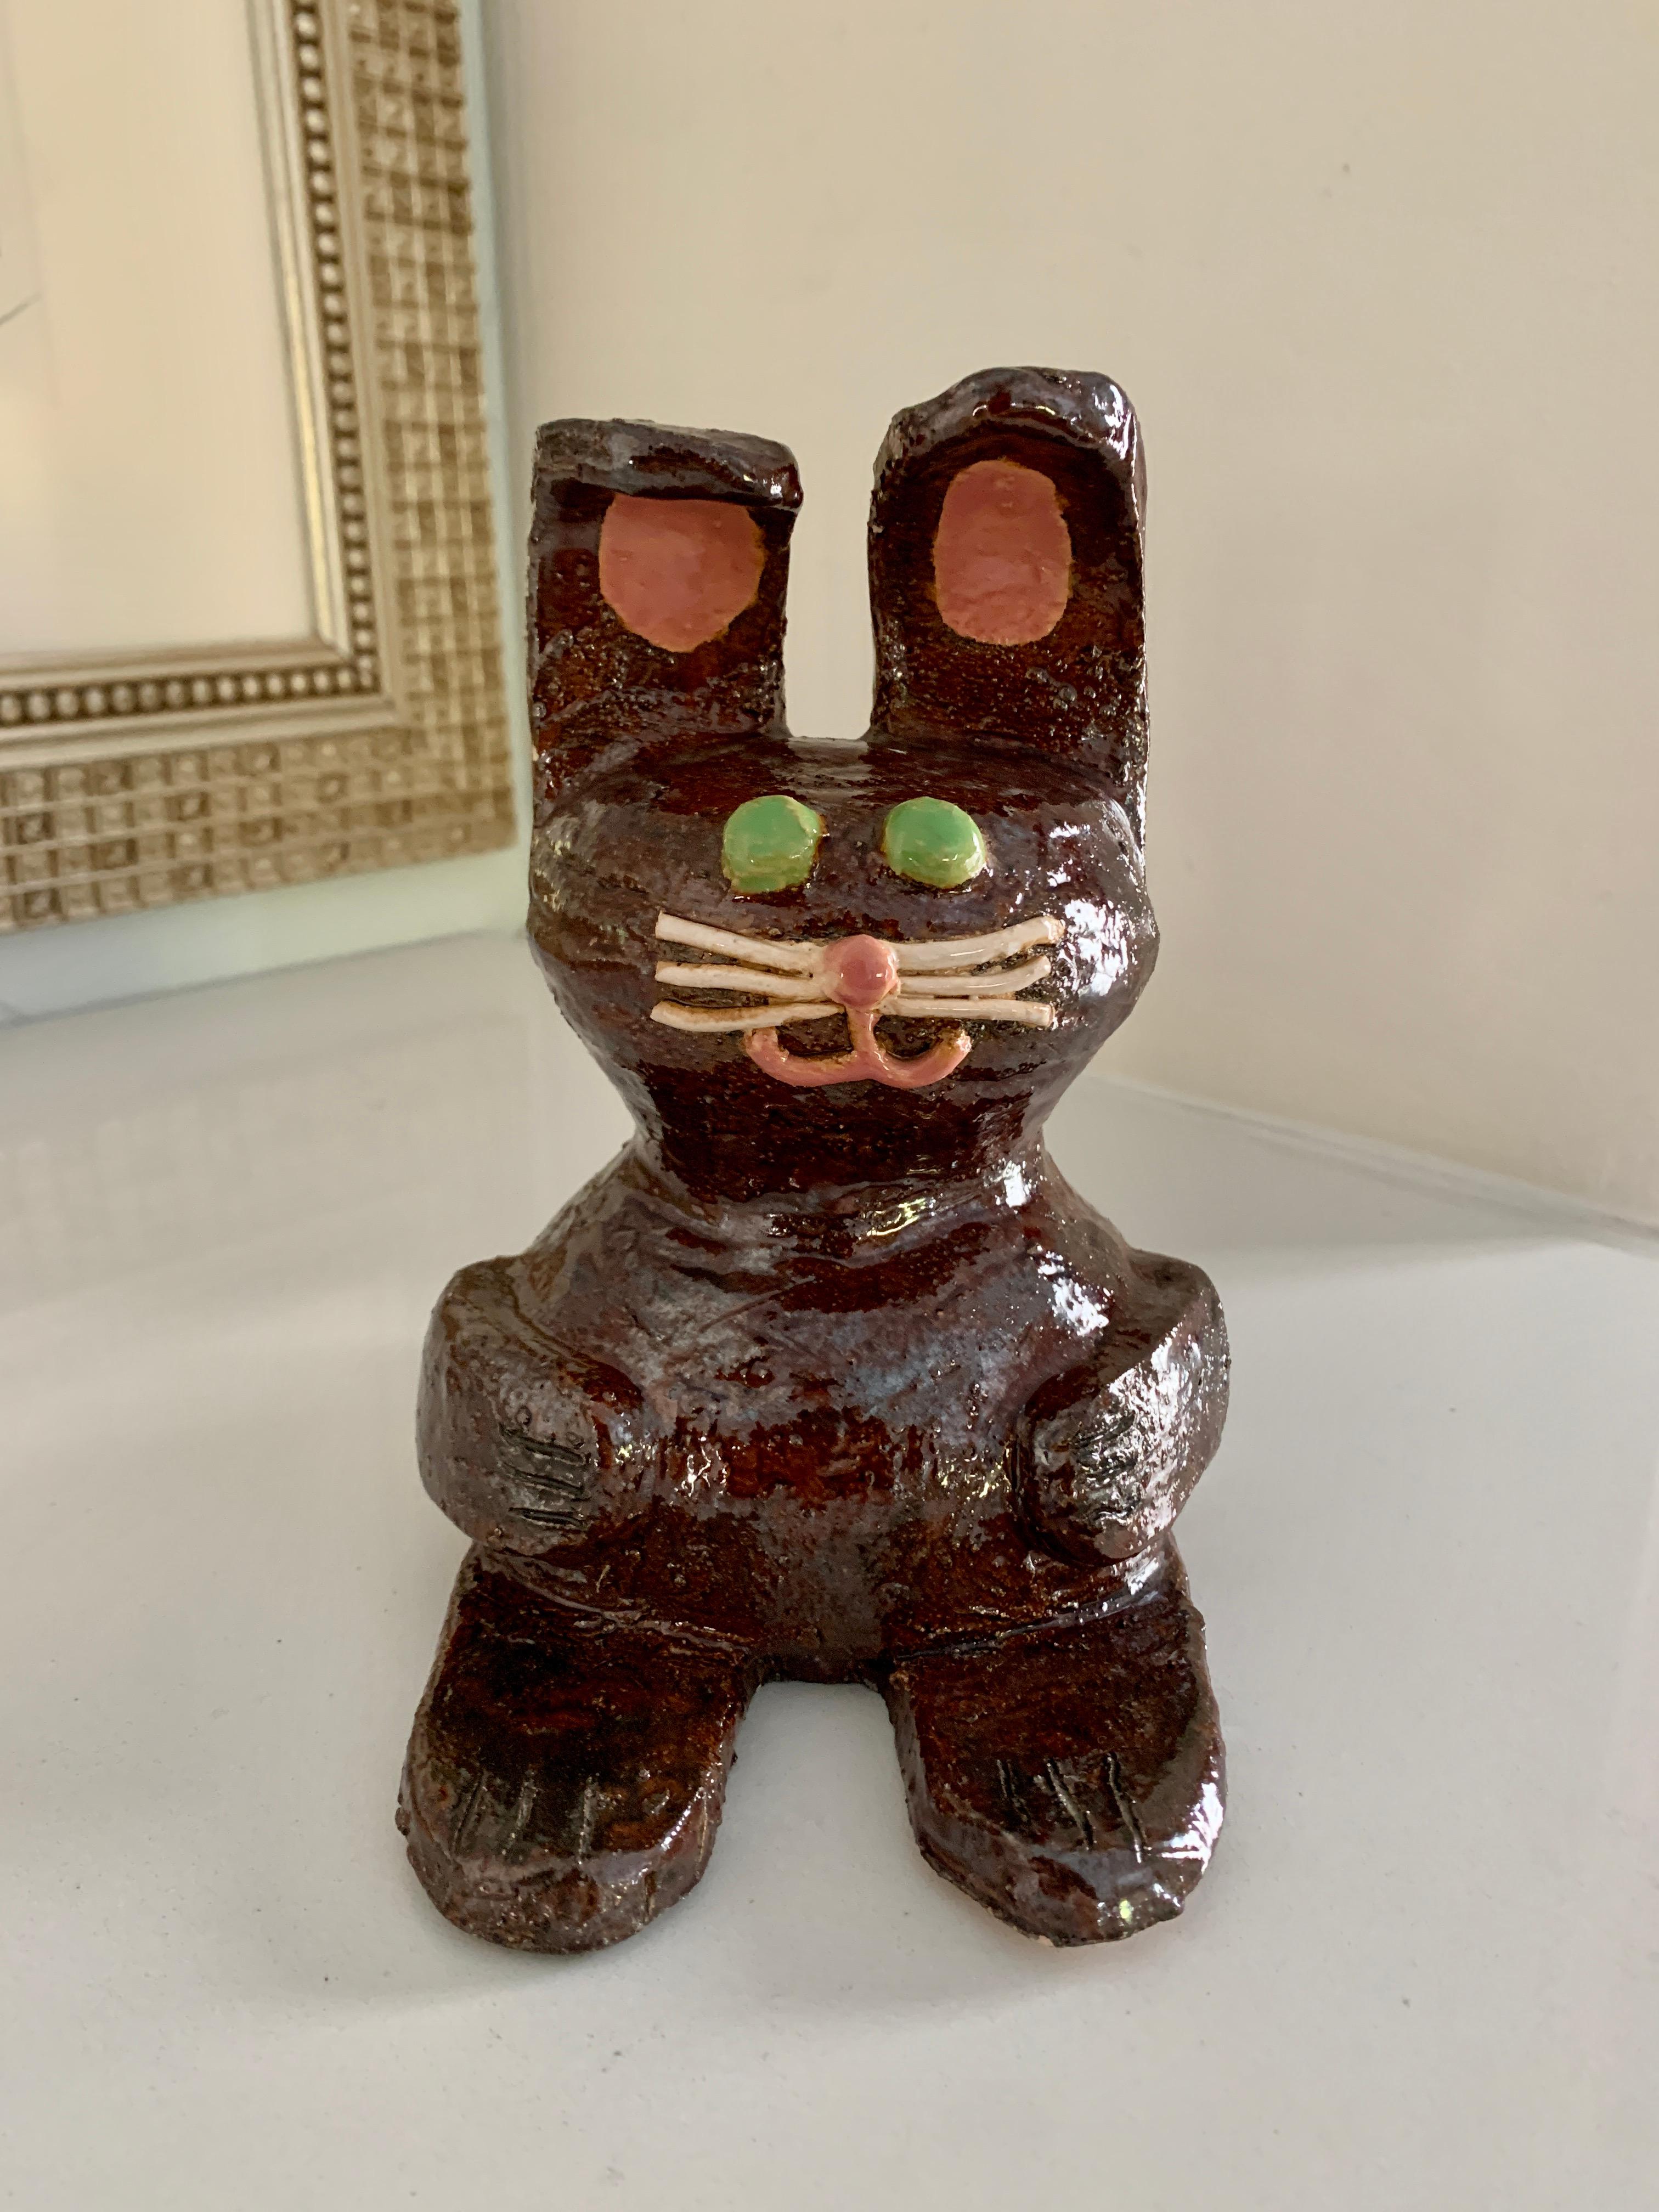 Folk Art Studio Pottery Bunny - We shop a lot and this bunny is one of our favorite finds. A precious little thing with a great spirit and energy. A compliment to any settings, especially the Childs room. Baby gifts, mothers day gifts, Christmas